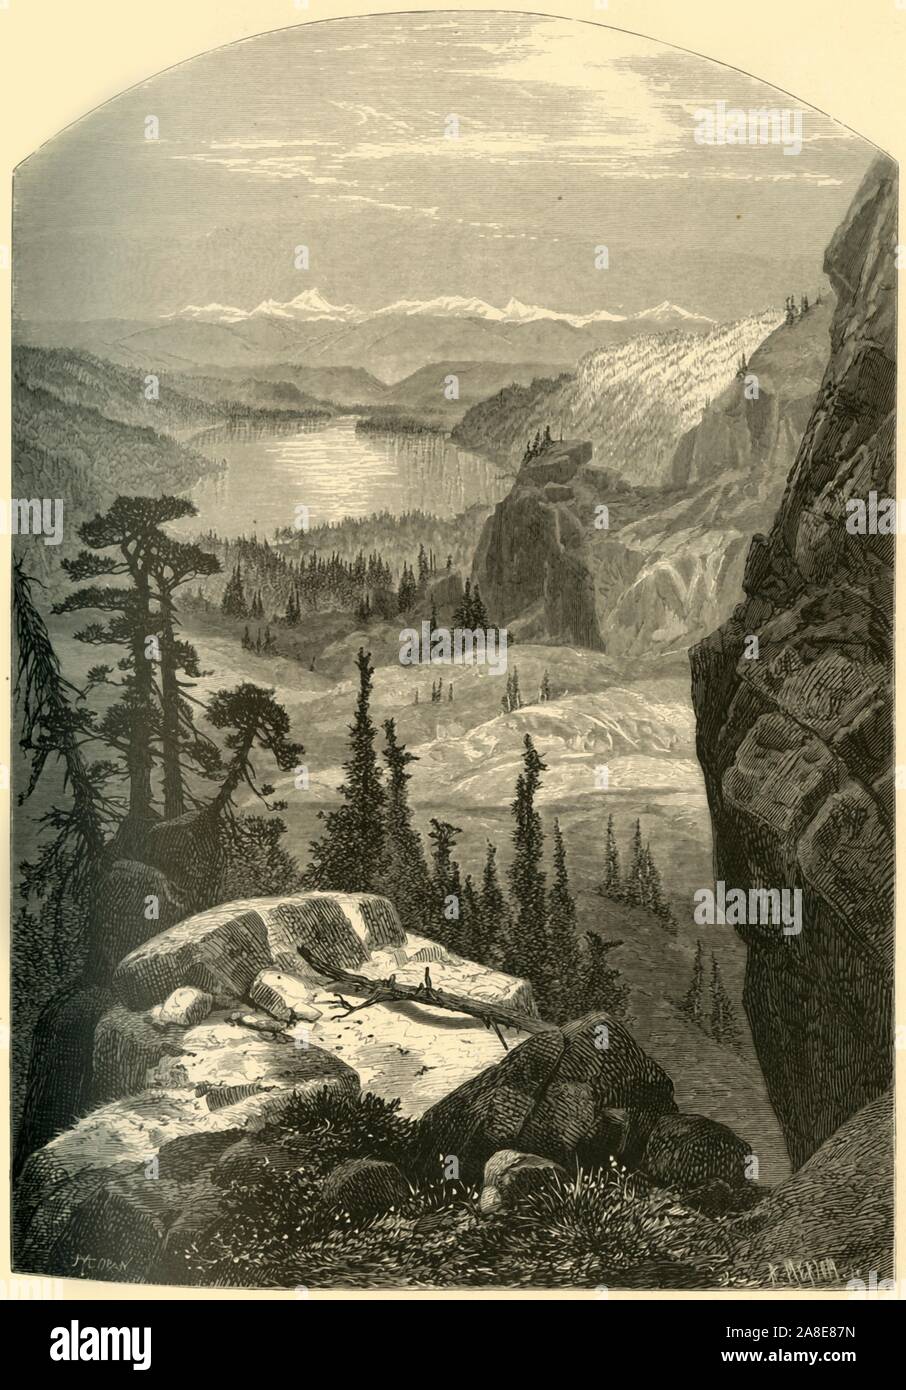 'Donner Lake, Nevada', 1874. View of Donner Lake, a freshwater lake in Northeast California on the eastern slope of the Sierra Nevada, USA. 'The great sheet of clear and beautiful water lies high up in the mountains, between steep sides, and in the midst of the wildest and most picturesque of the scenery of the Sierra summits. The depth of the lake is very great, but its waters are so transparent that one can look down many fathoms into them; they are unsullied by any disturbance of soil or sand, for they lie in a bed formed almost entirely of the solid rock'. From &quot;Picturesque America; o Stock Photo